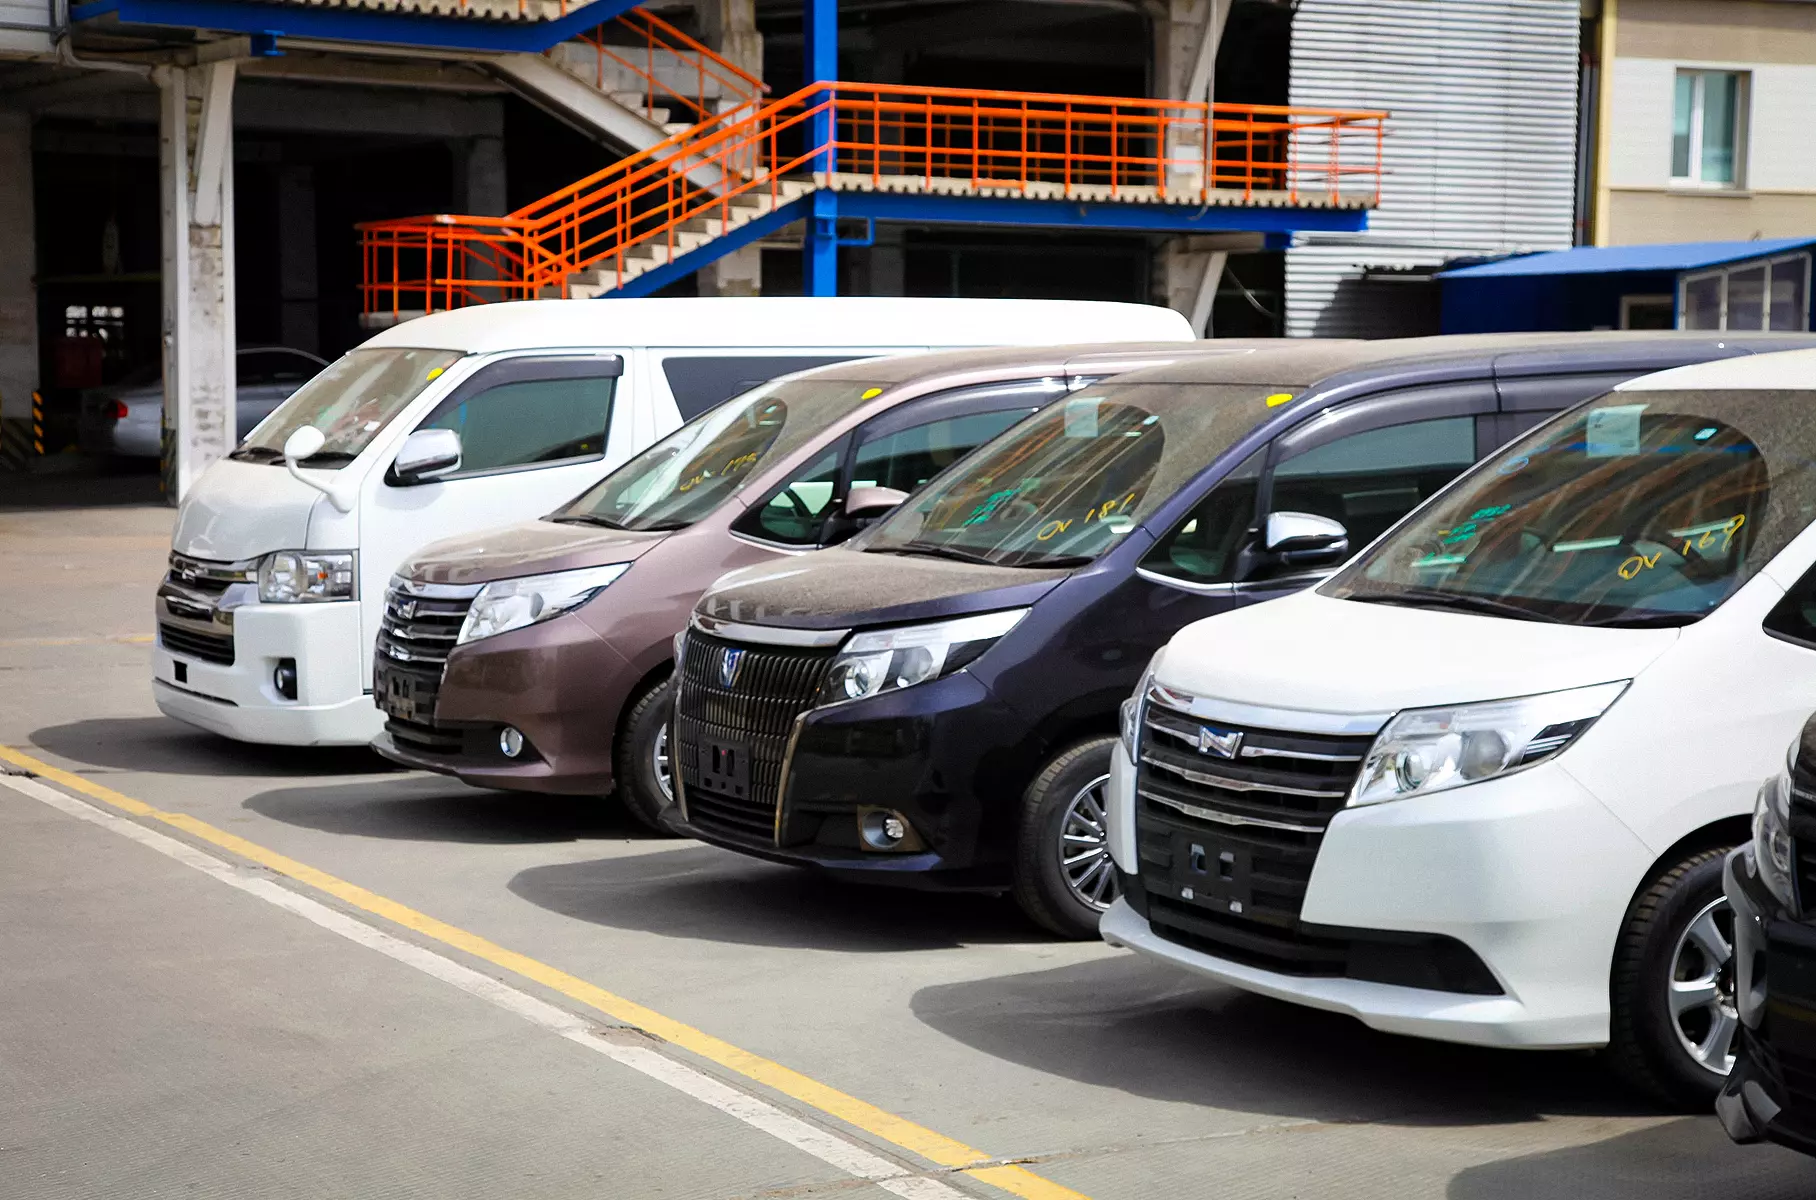 Compact, small-volume cars from Japan are being imported to Russia en masse